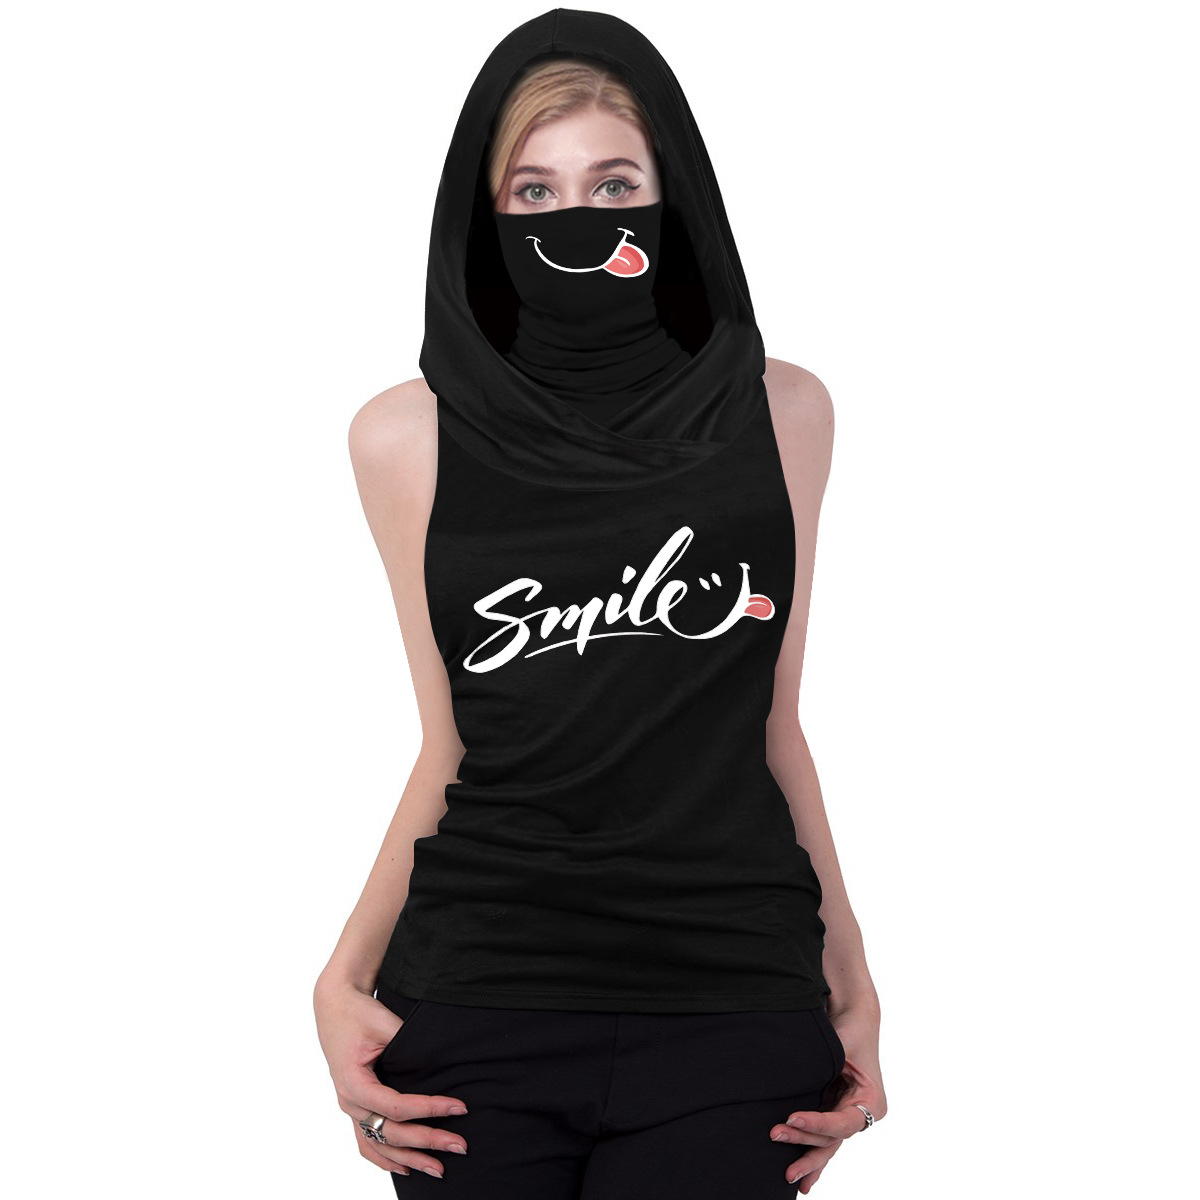 Sleeveless Top With Hood and Dust Mask